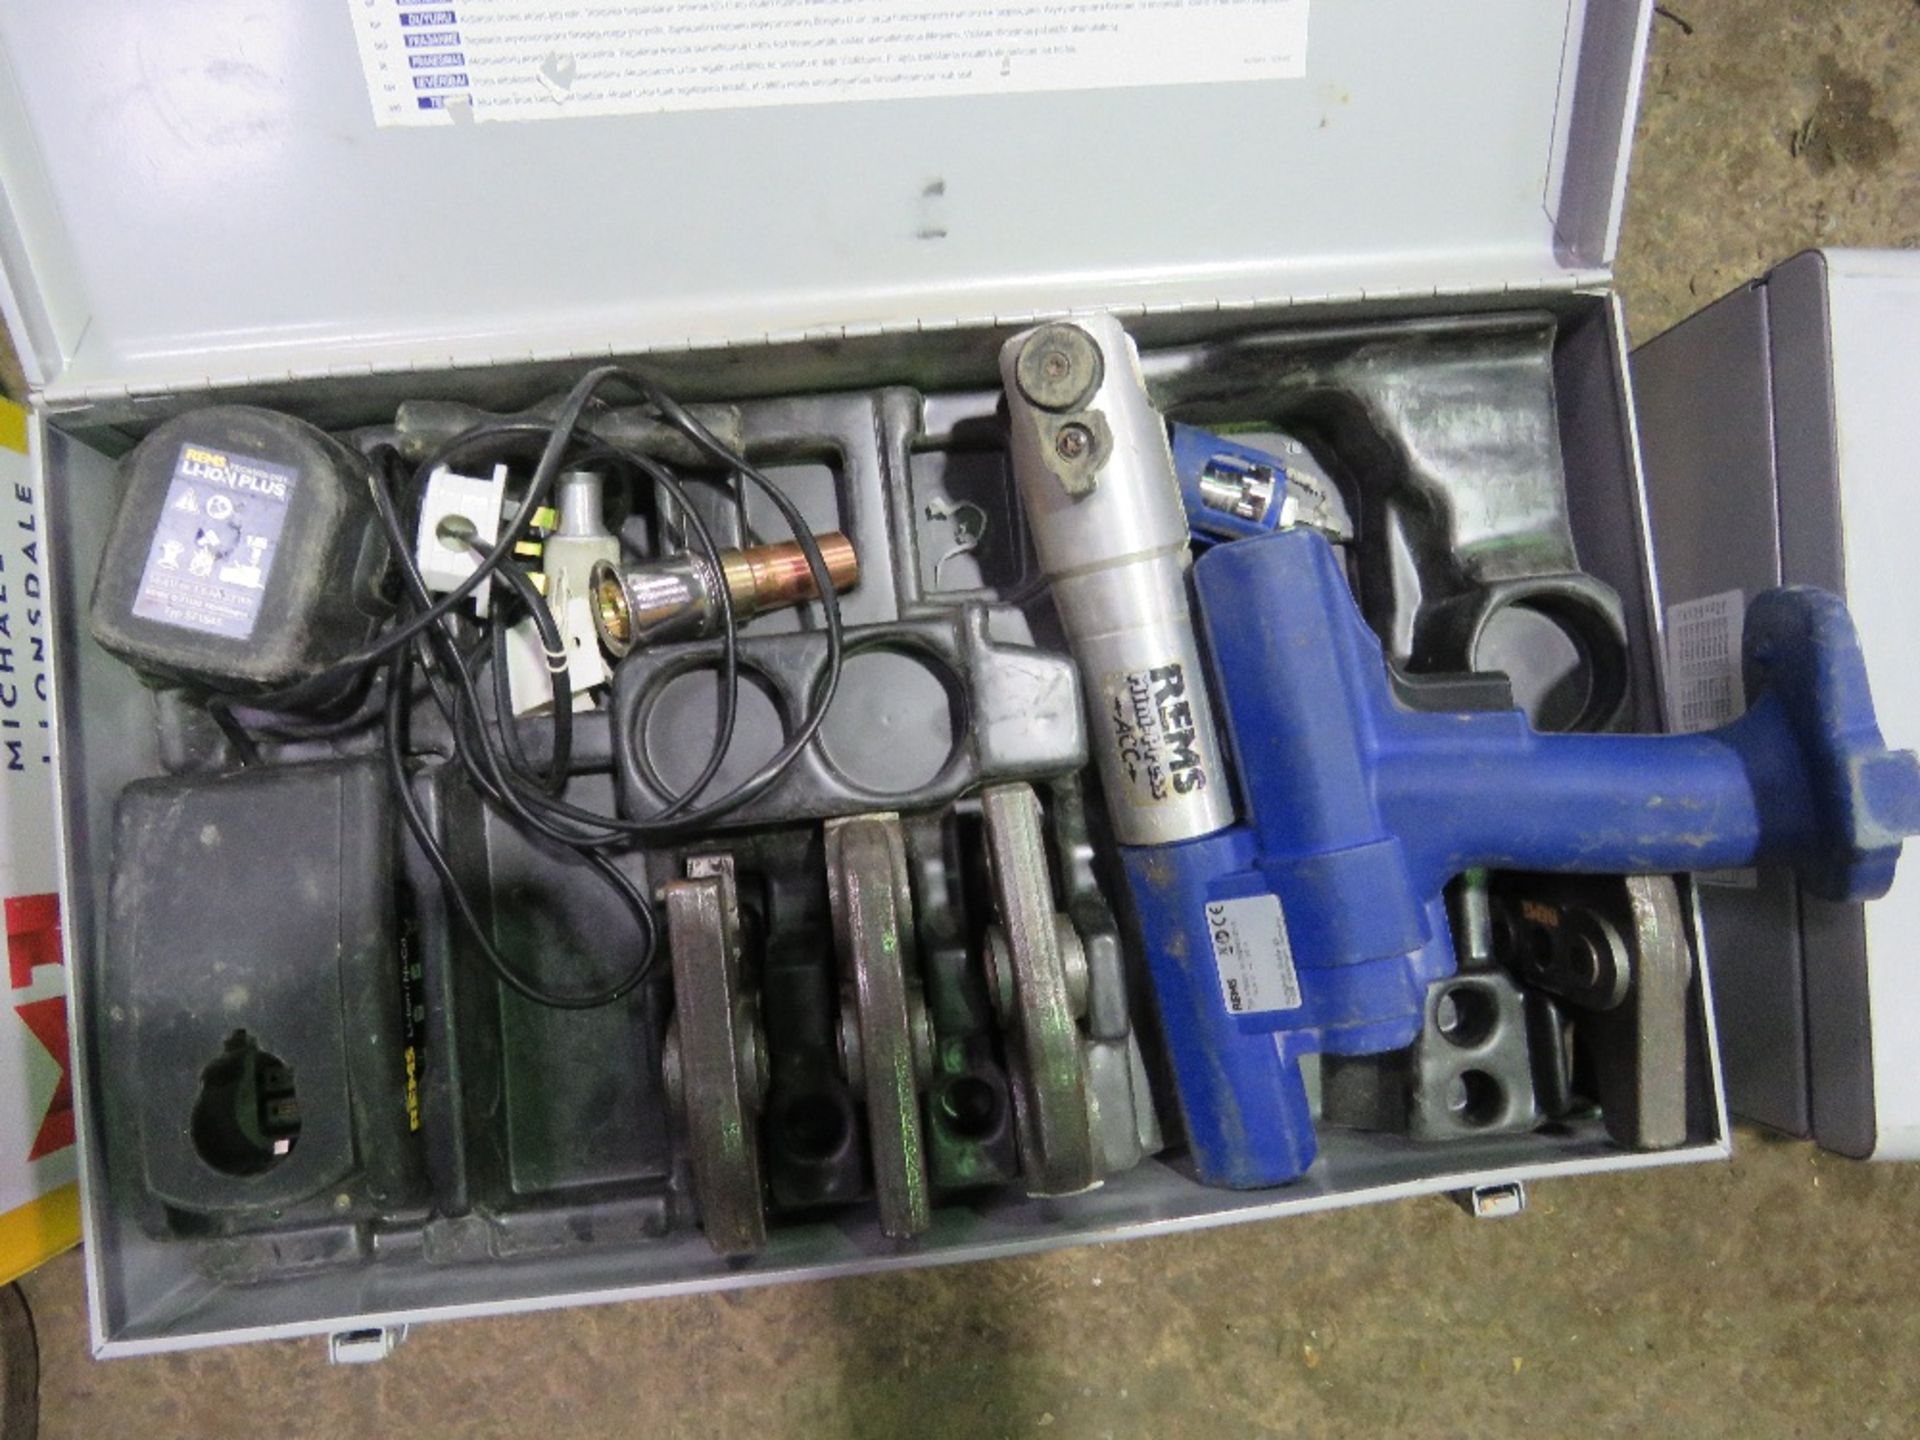 REMS MINI PRESS BATTERY CRIMPING PRESS SET IN A CASE. SOURCED FROM LARGE CONSTRUCTION COMPANY LIQUID